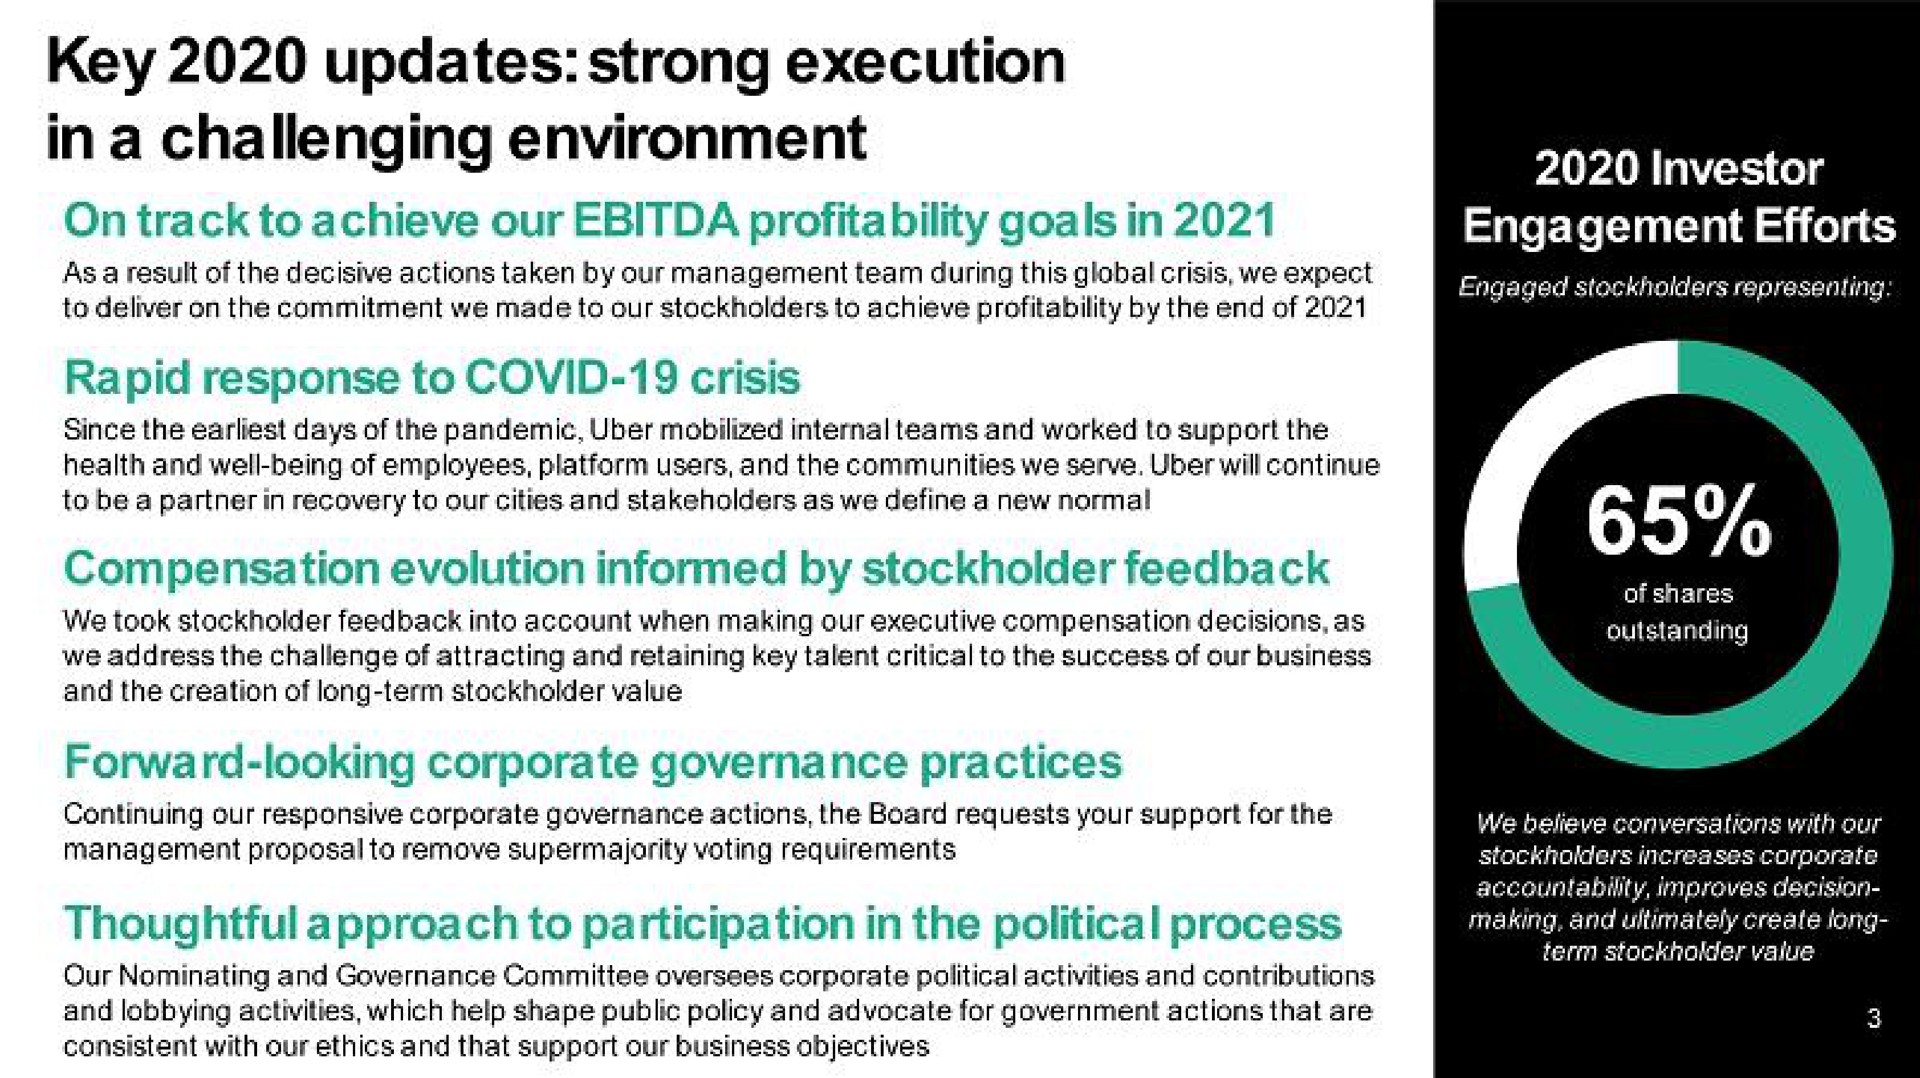 key updates strong execution challenging environment on track to achieve our profitability goals in rapid response to covid crisis compensation evolution informed by stockholder feedback forward looking corporate governance practices thoughtful approach to participation in the political process investor engagement efforts | Uber